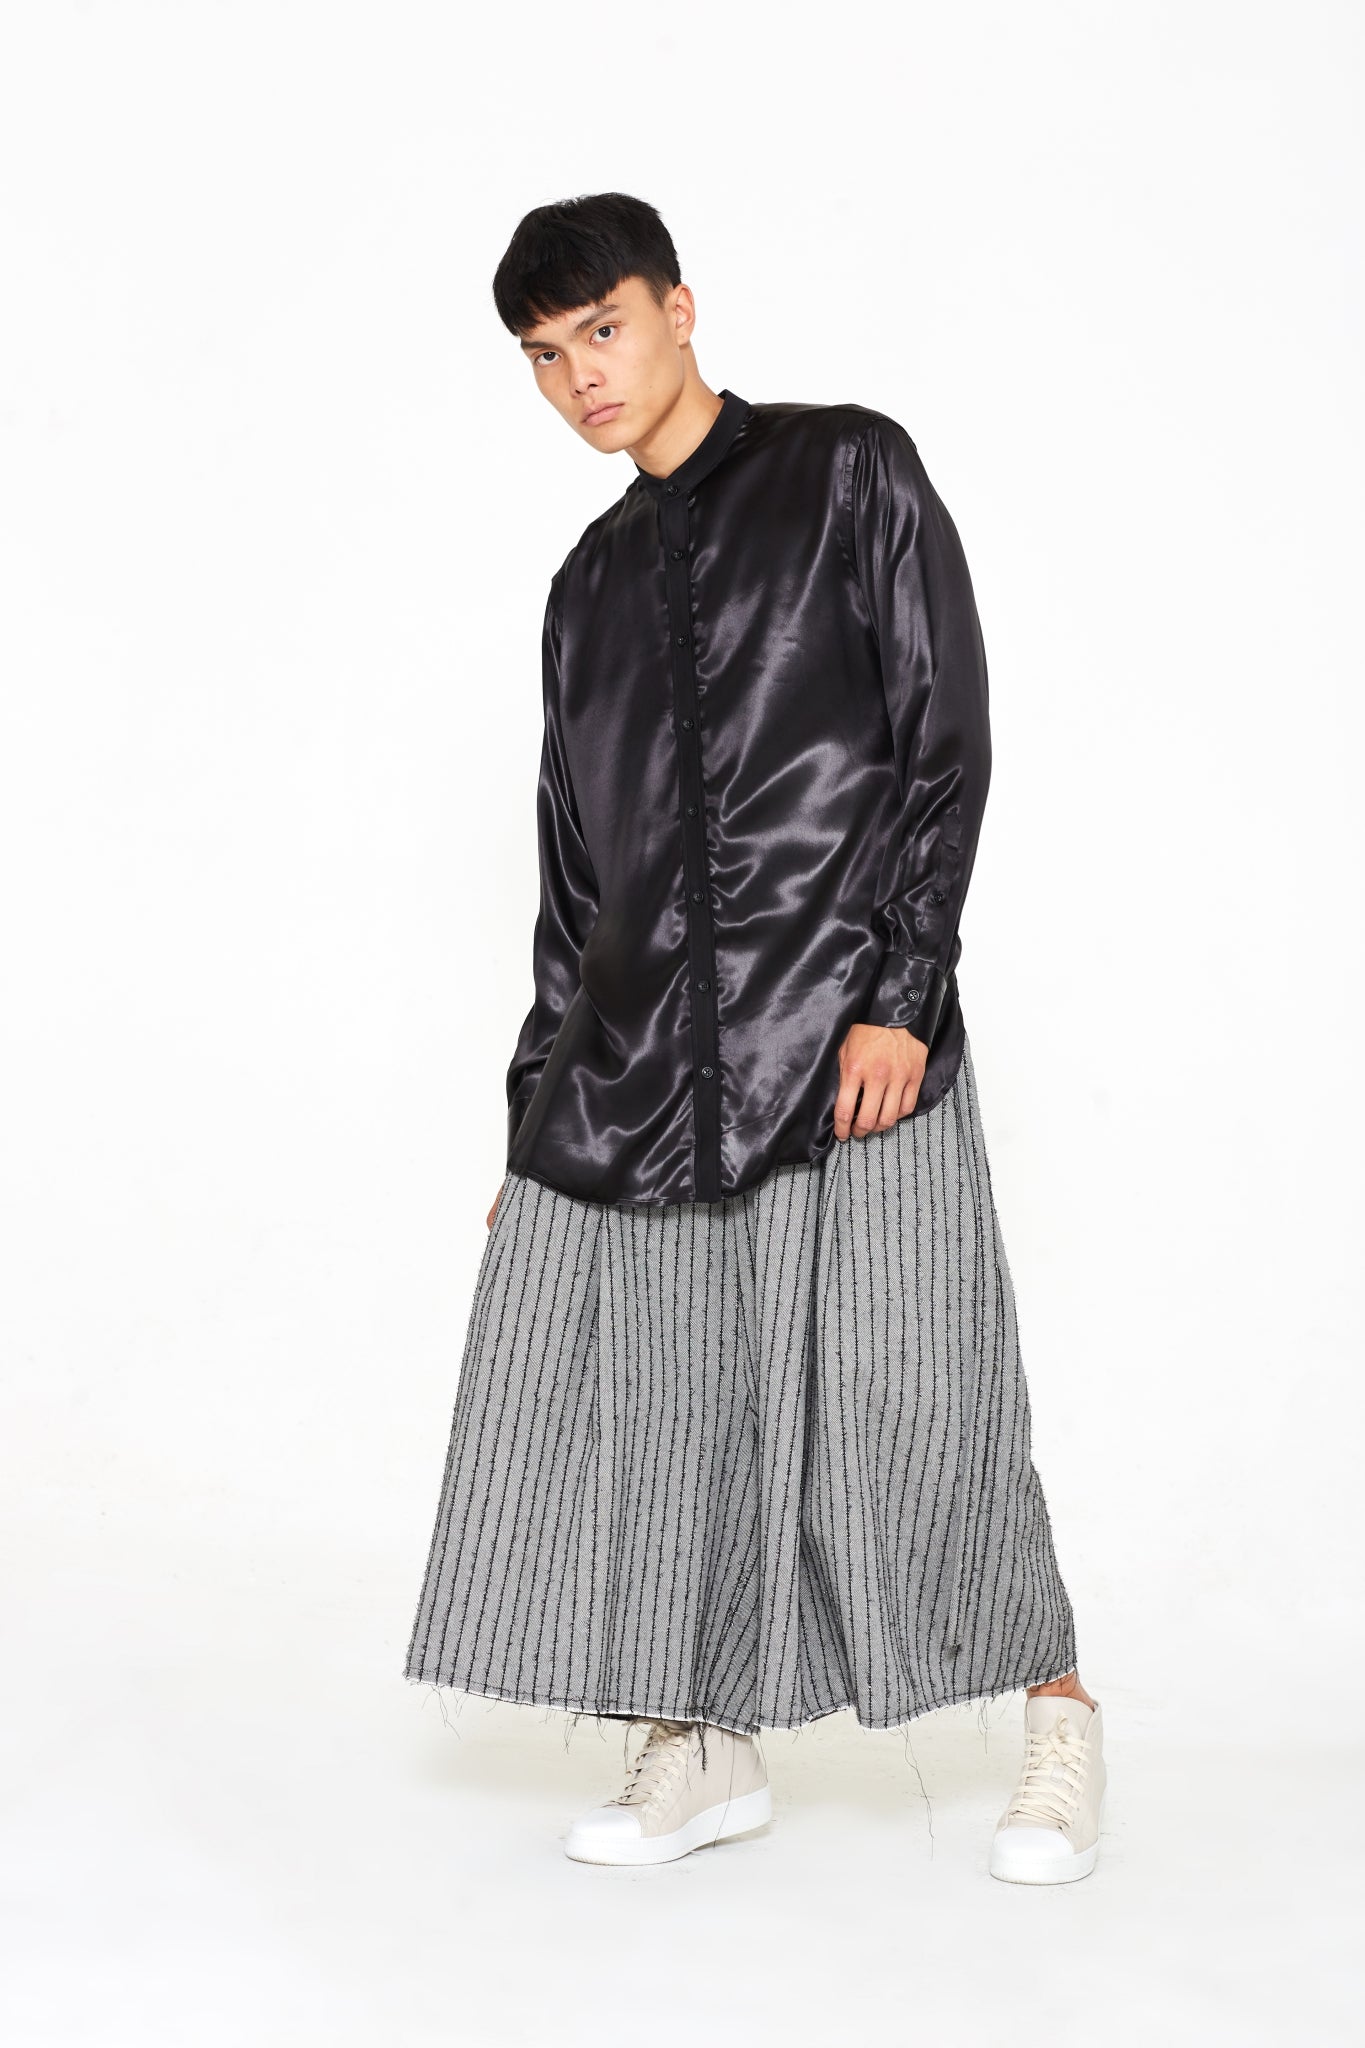 "The Skirt Pant" in Grey and Black Stripes